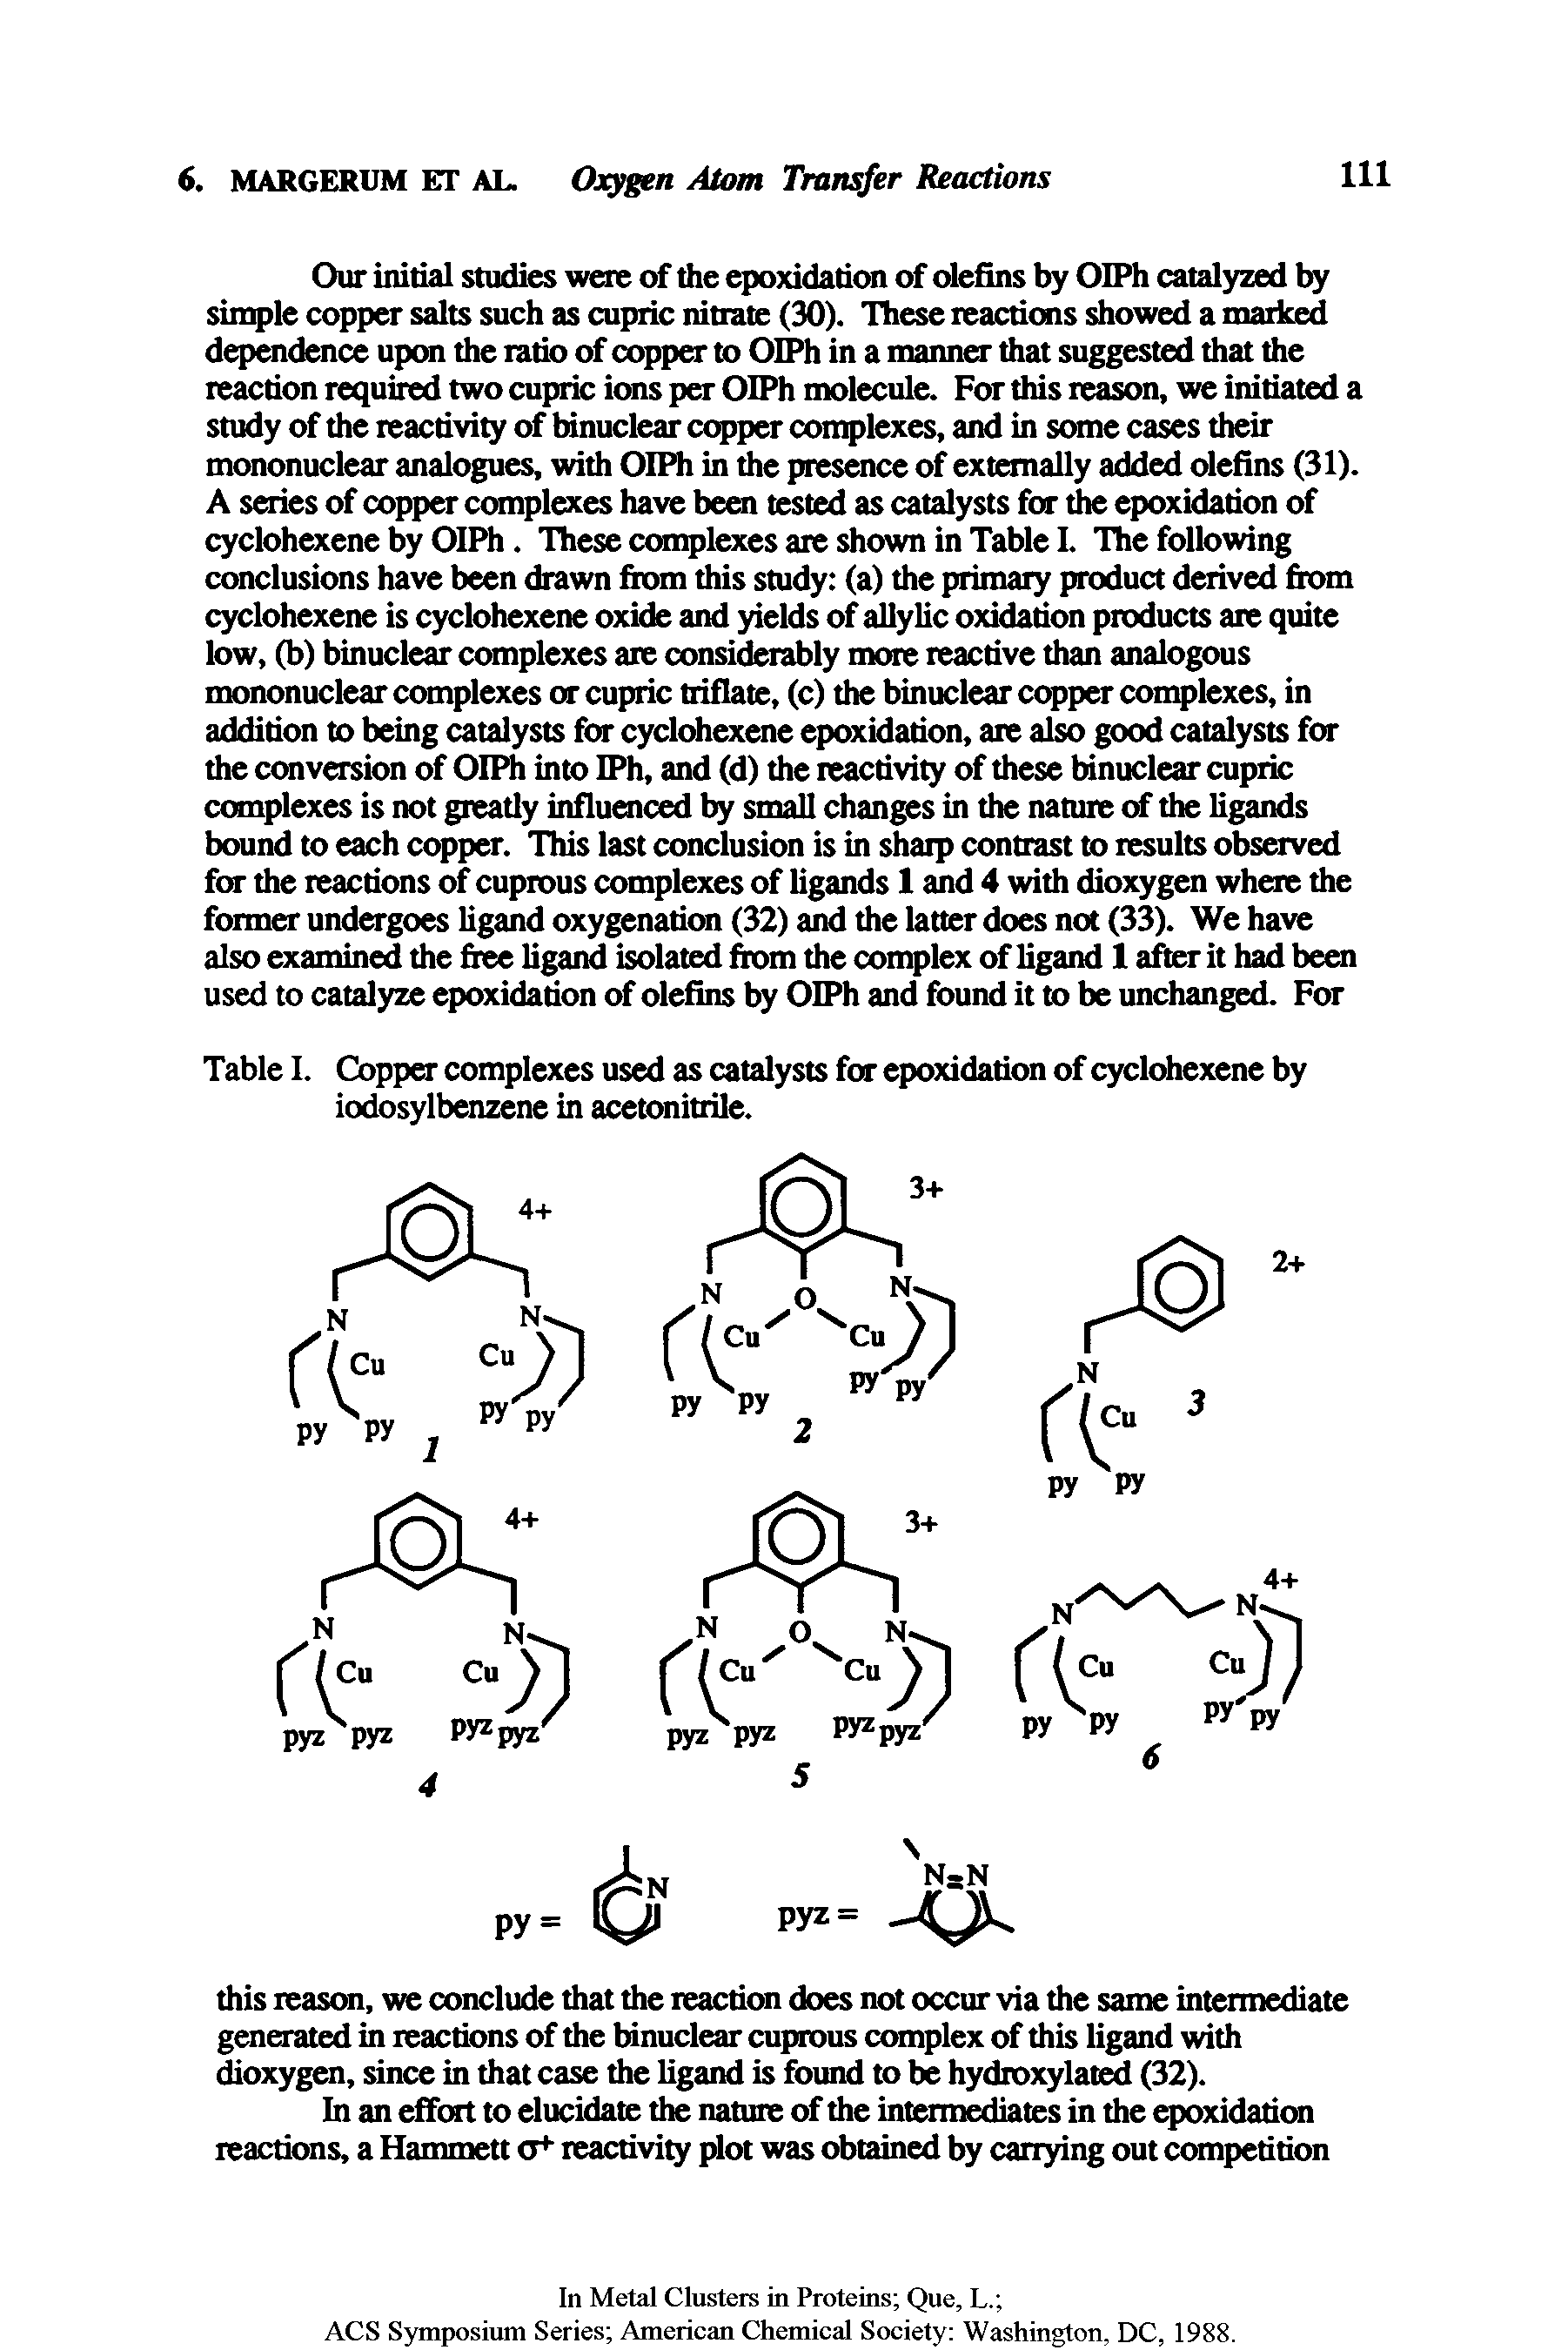 Table 1. Copper complexes used as catalysts for epoxidation of cyclohexene by iodosylbenzene in acetonitrile.